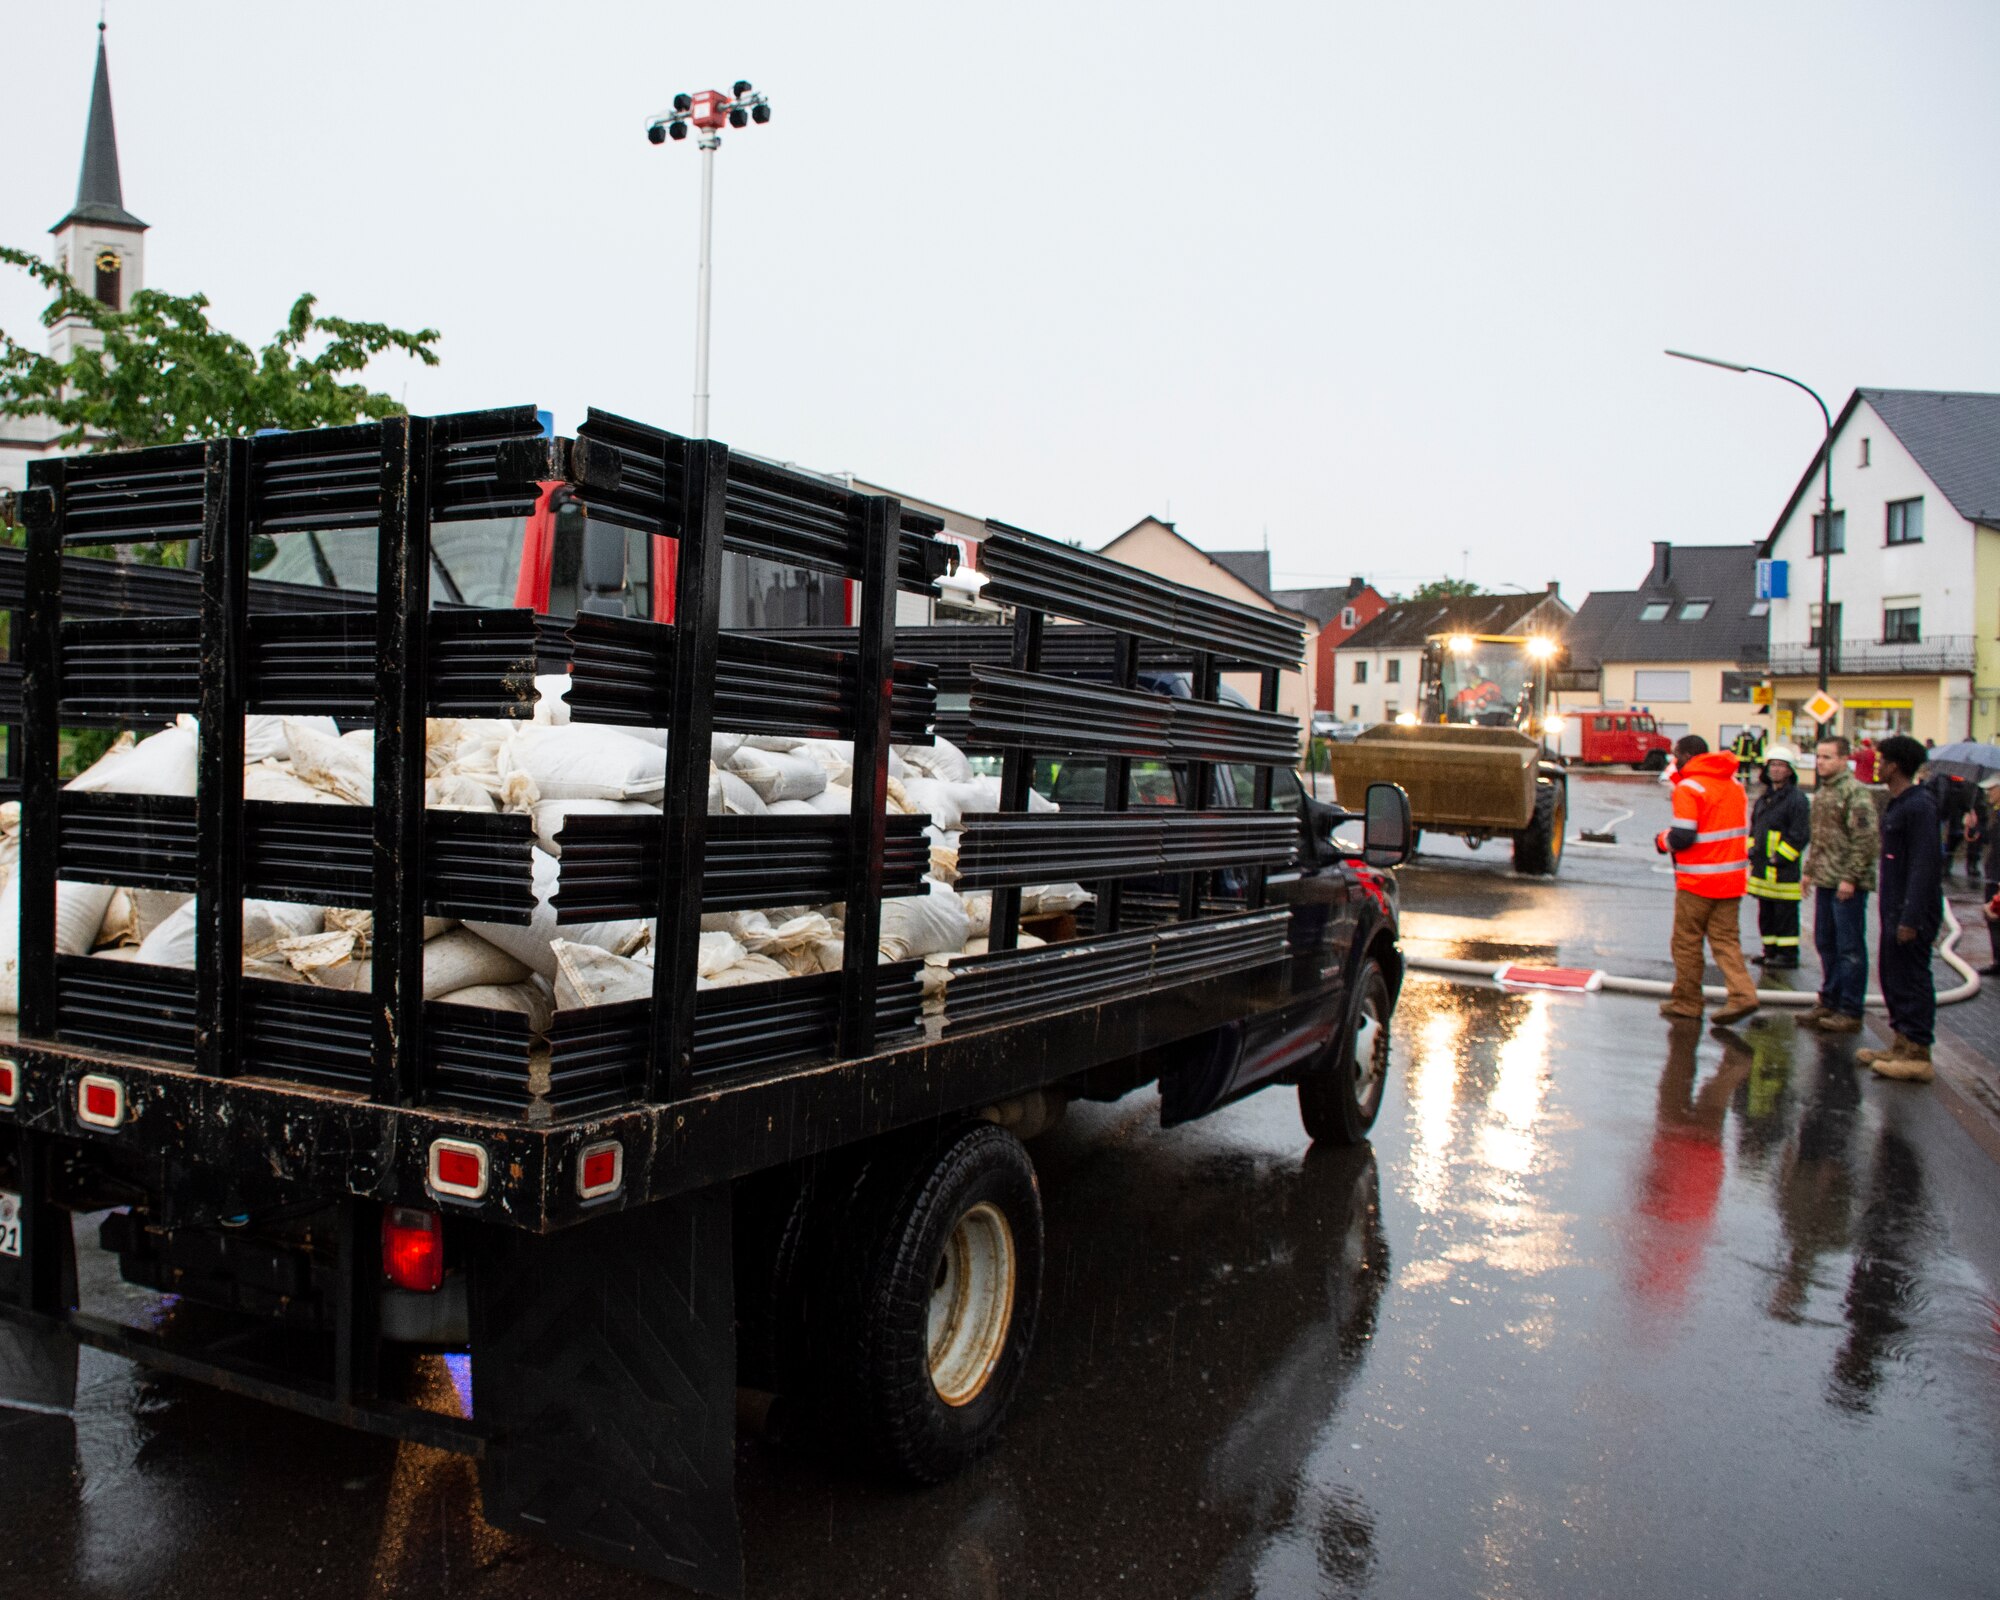 Members from the 52nd Civil Engineer Squadron from Spangdahlem Air Base, Germany, arrive in Binsfeld, Germany, to deliver sandbags after flood waters threatened homes and businesses in the town July 14, 2021.